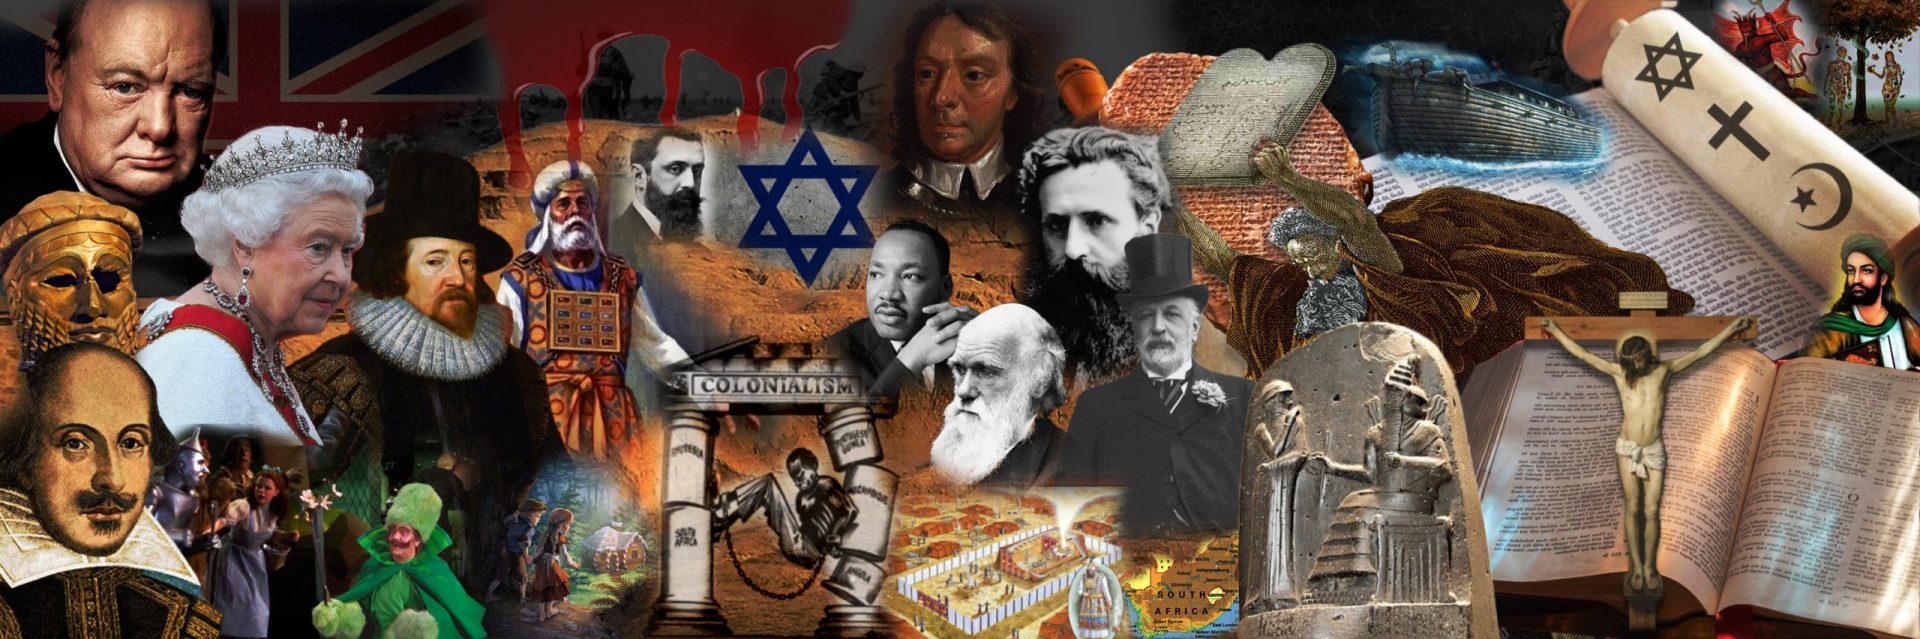 THE MYTH OF THE JEWISH EXILEFROM THE LAND OF ISRAEL